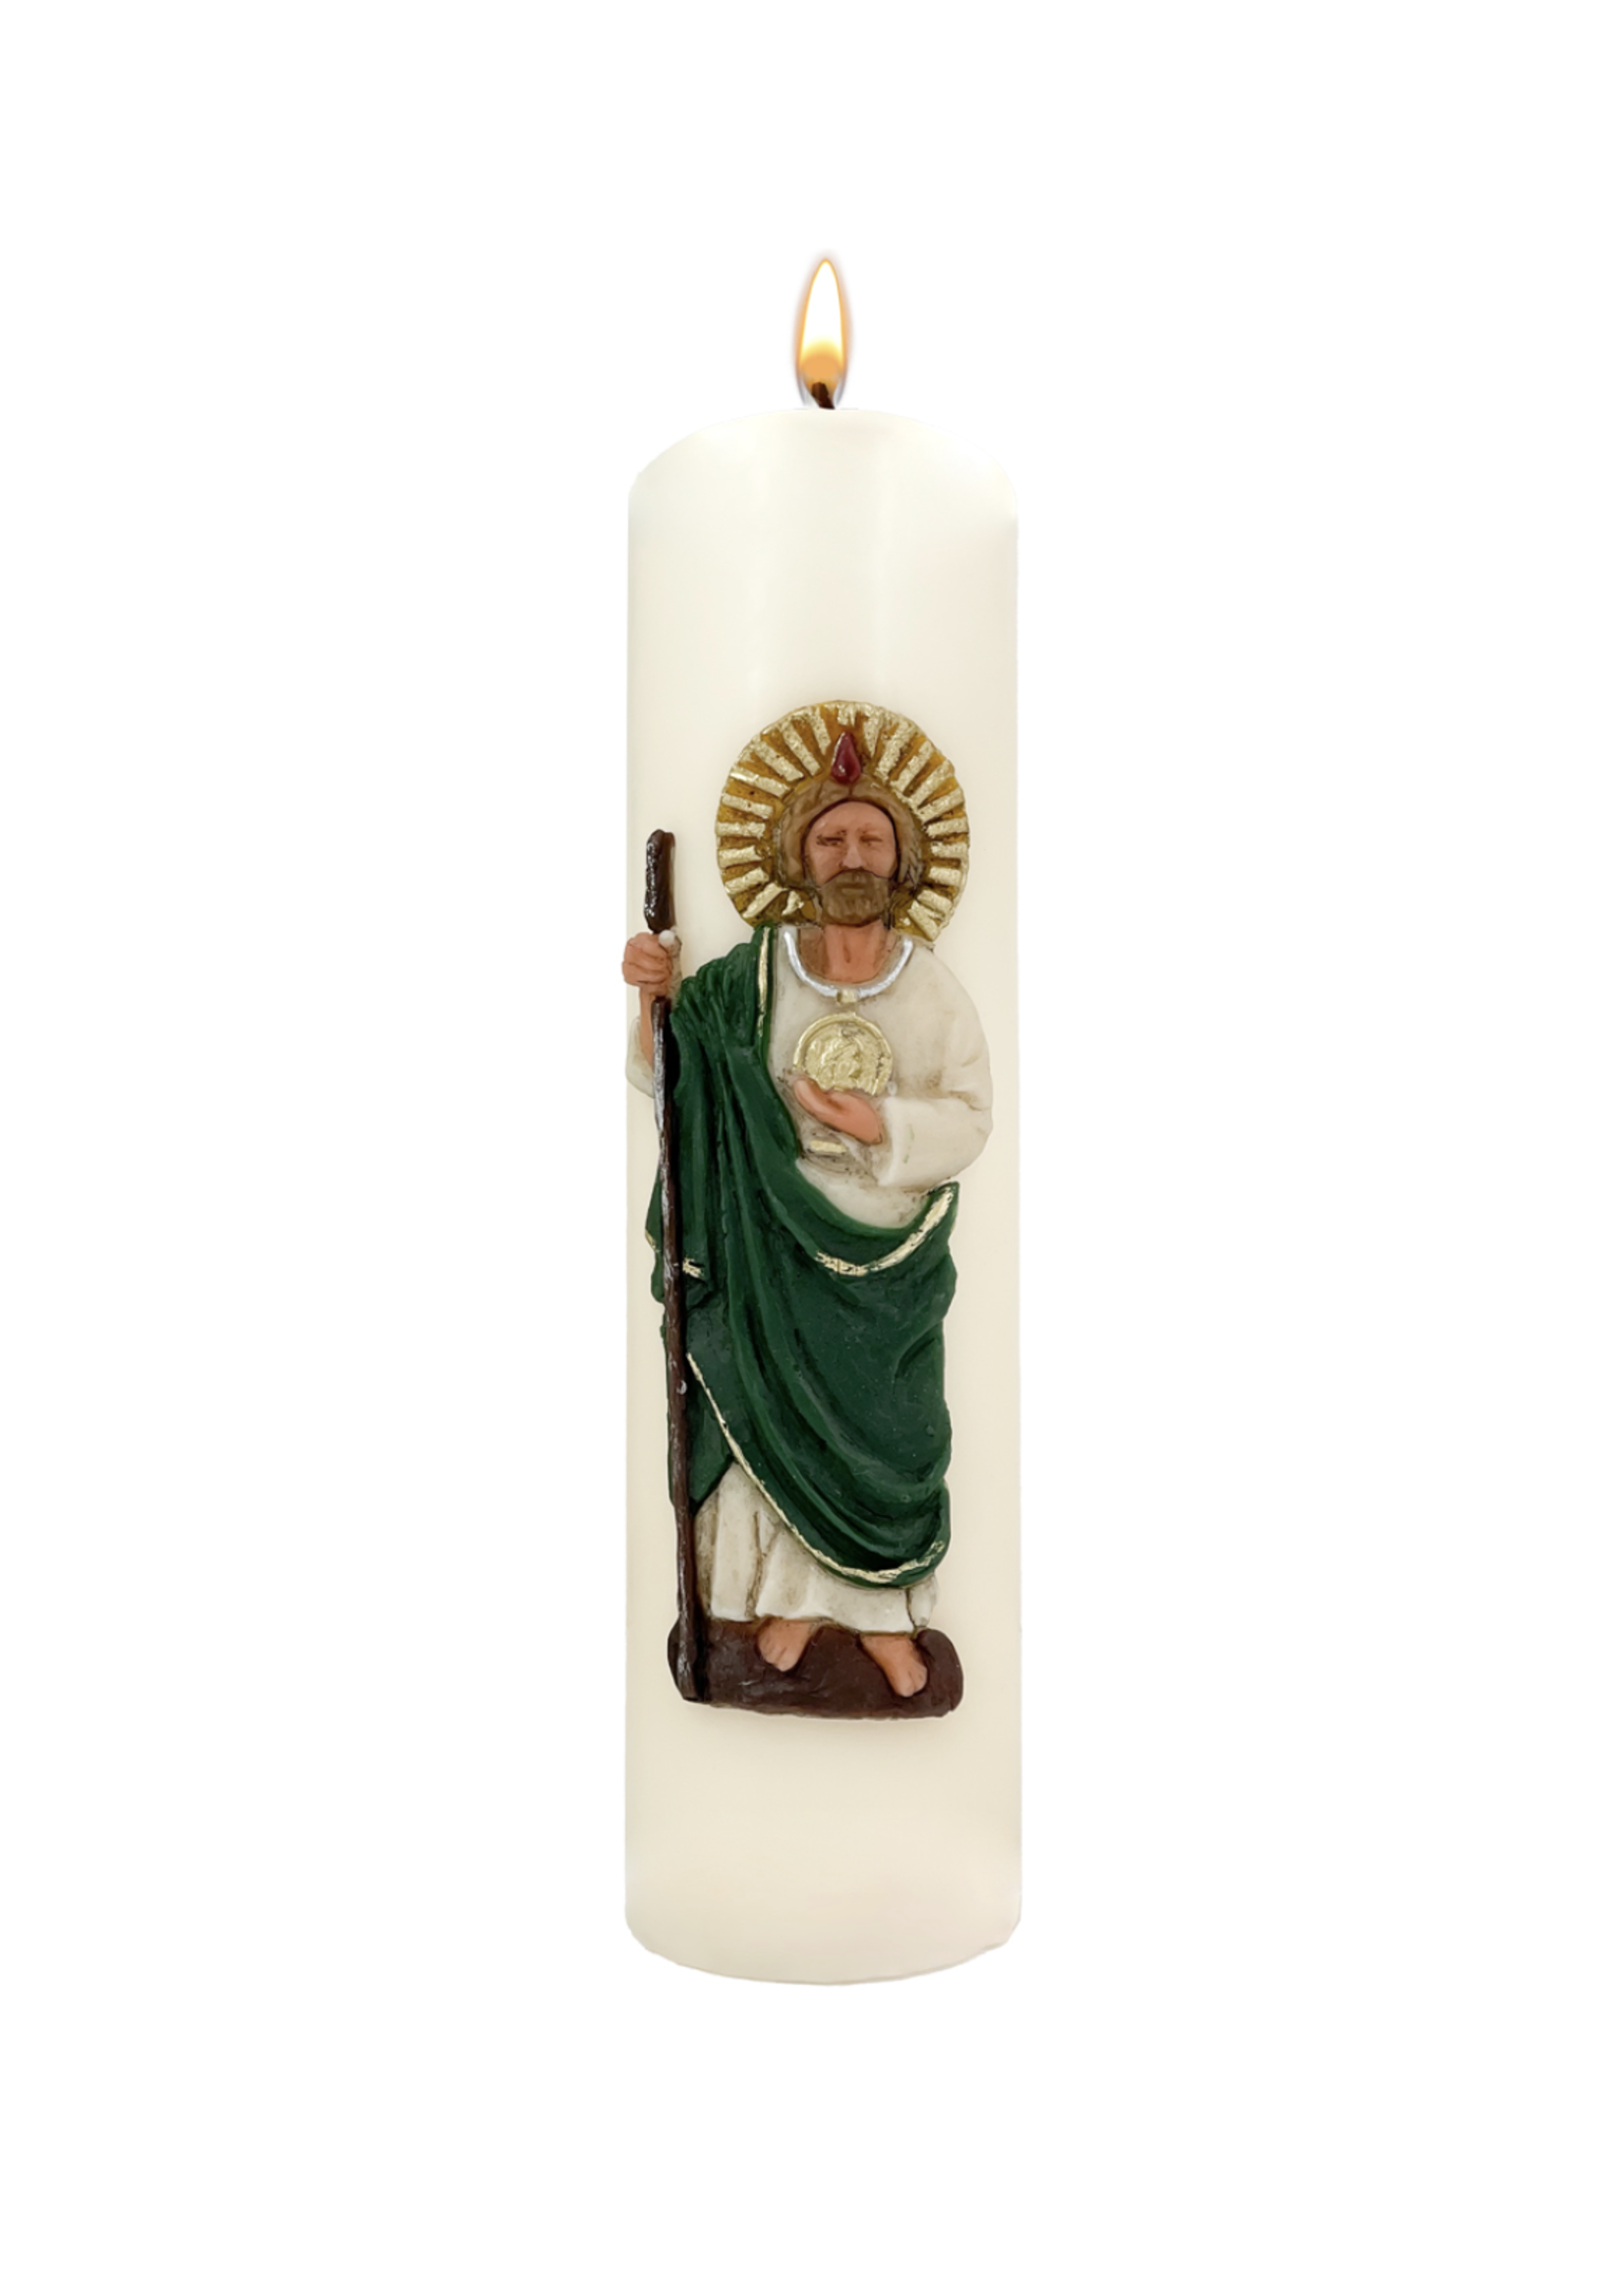 Saint Jude Home Paschal Candle